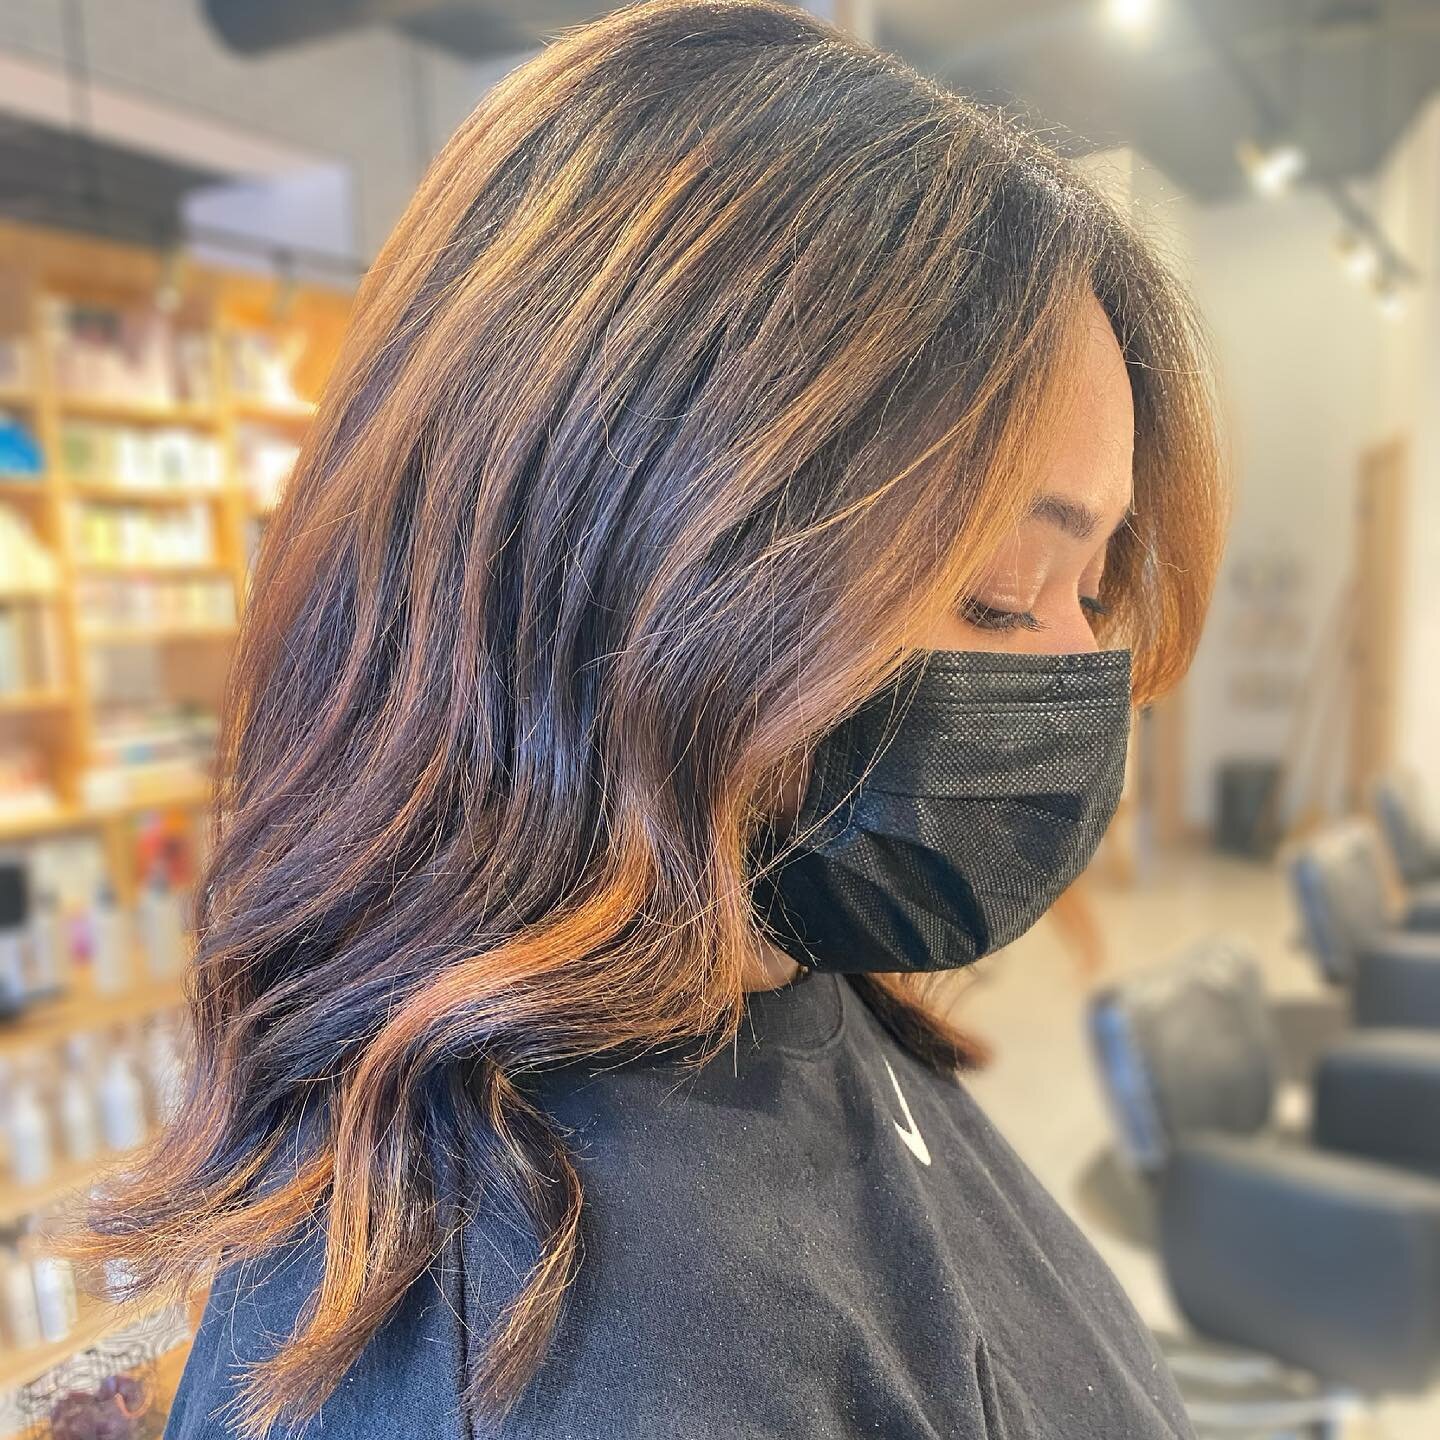 Why is Balayage so popular? 🪄

Open-air, free hand painted balayage Balayage creates a totally bespoke, personalized color finish. Healthy, natural looking hair will always be 'in' which is why the technique has remained popular for so many years. 
